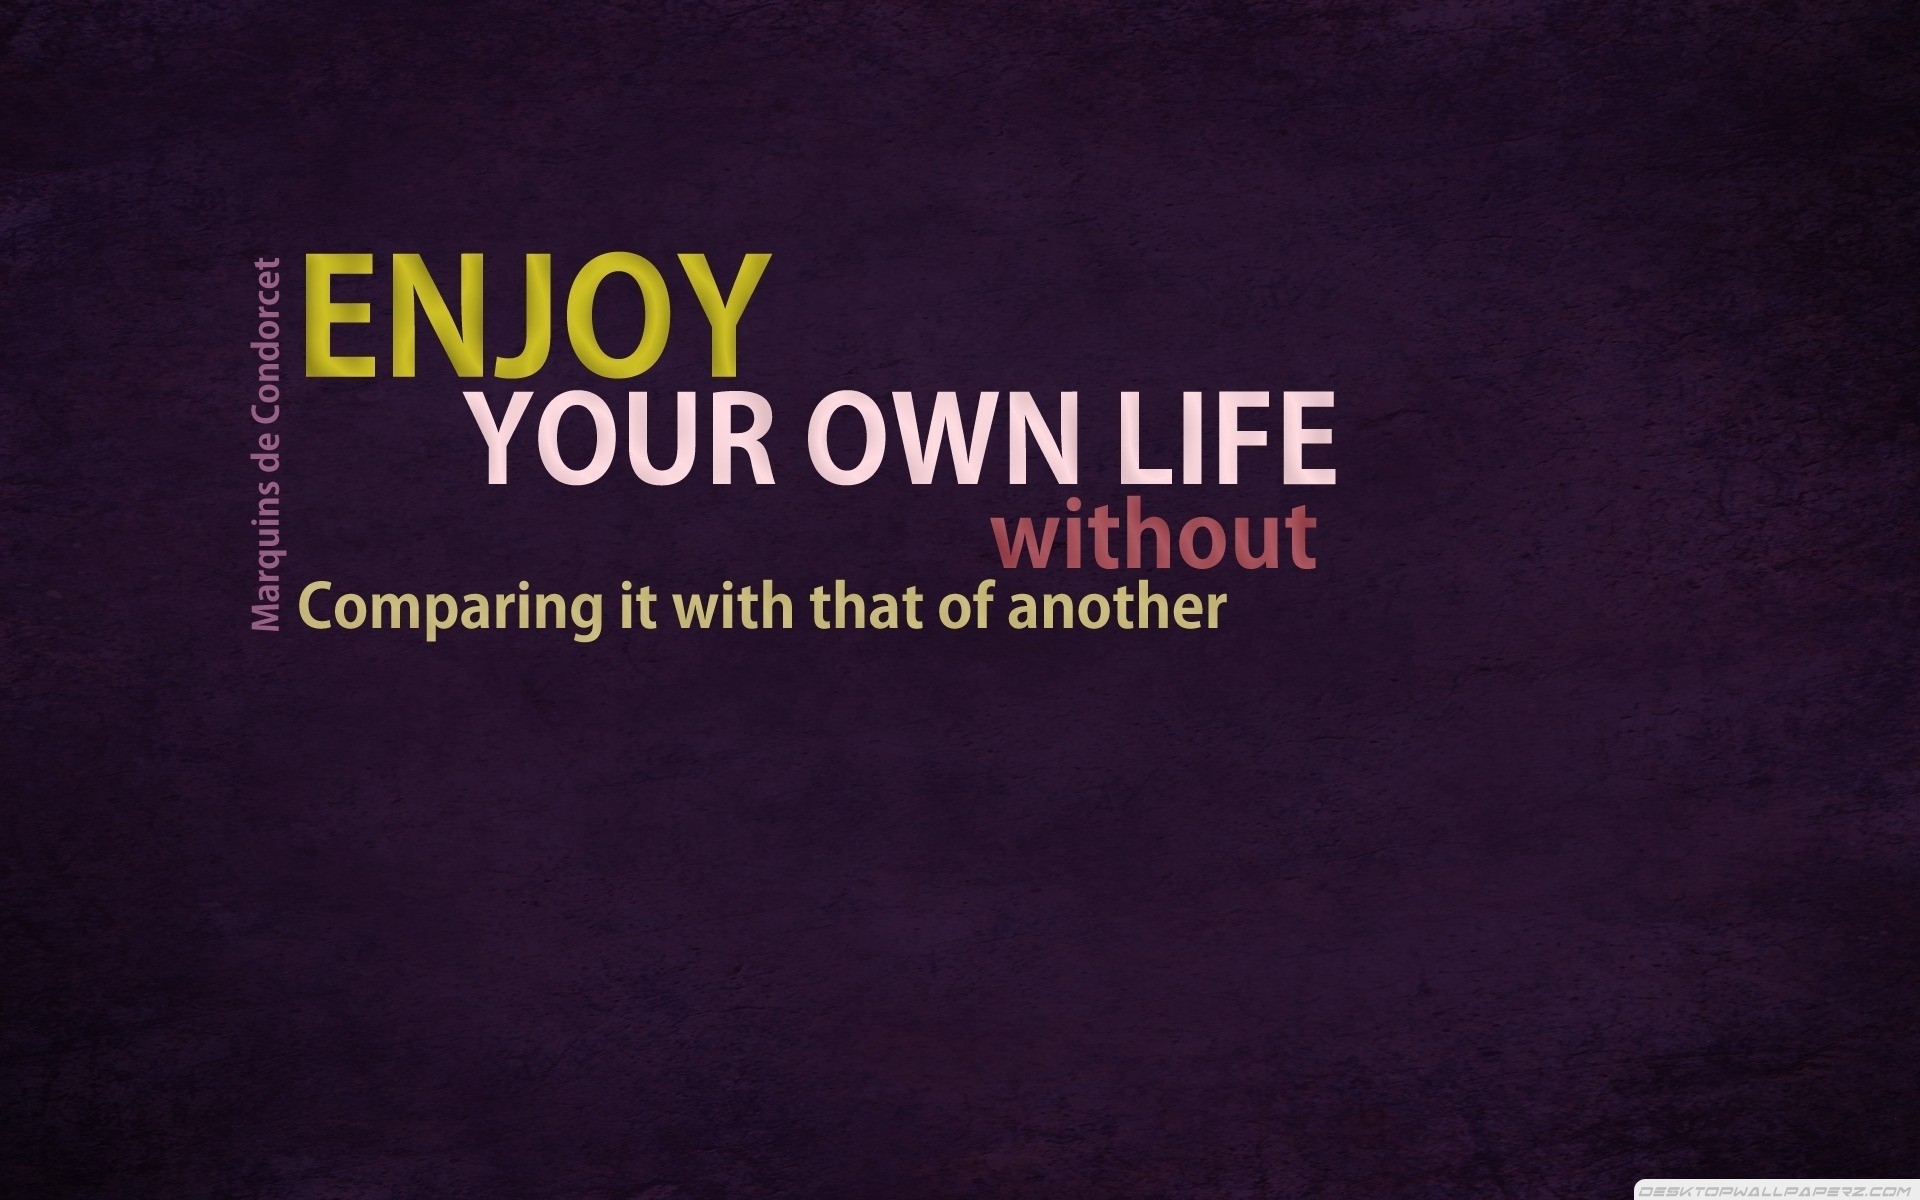 Text Only Life Motivational Posters 19201200 67426 HD Wallpaper